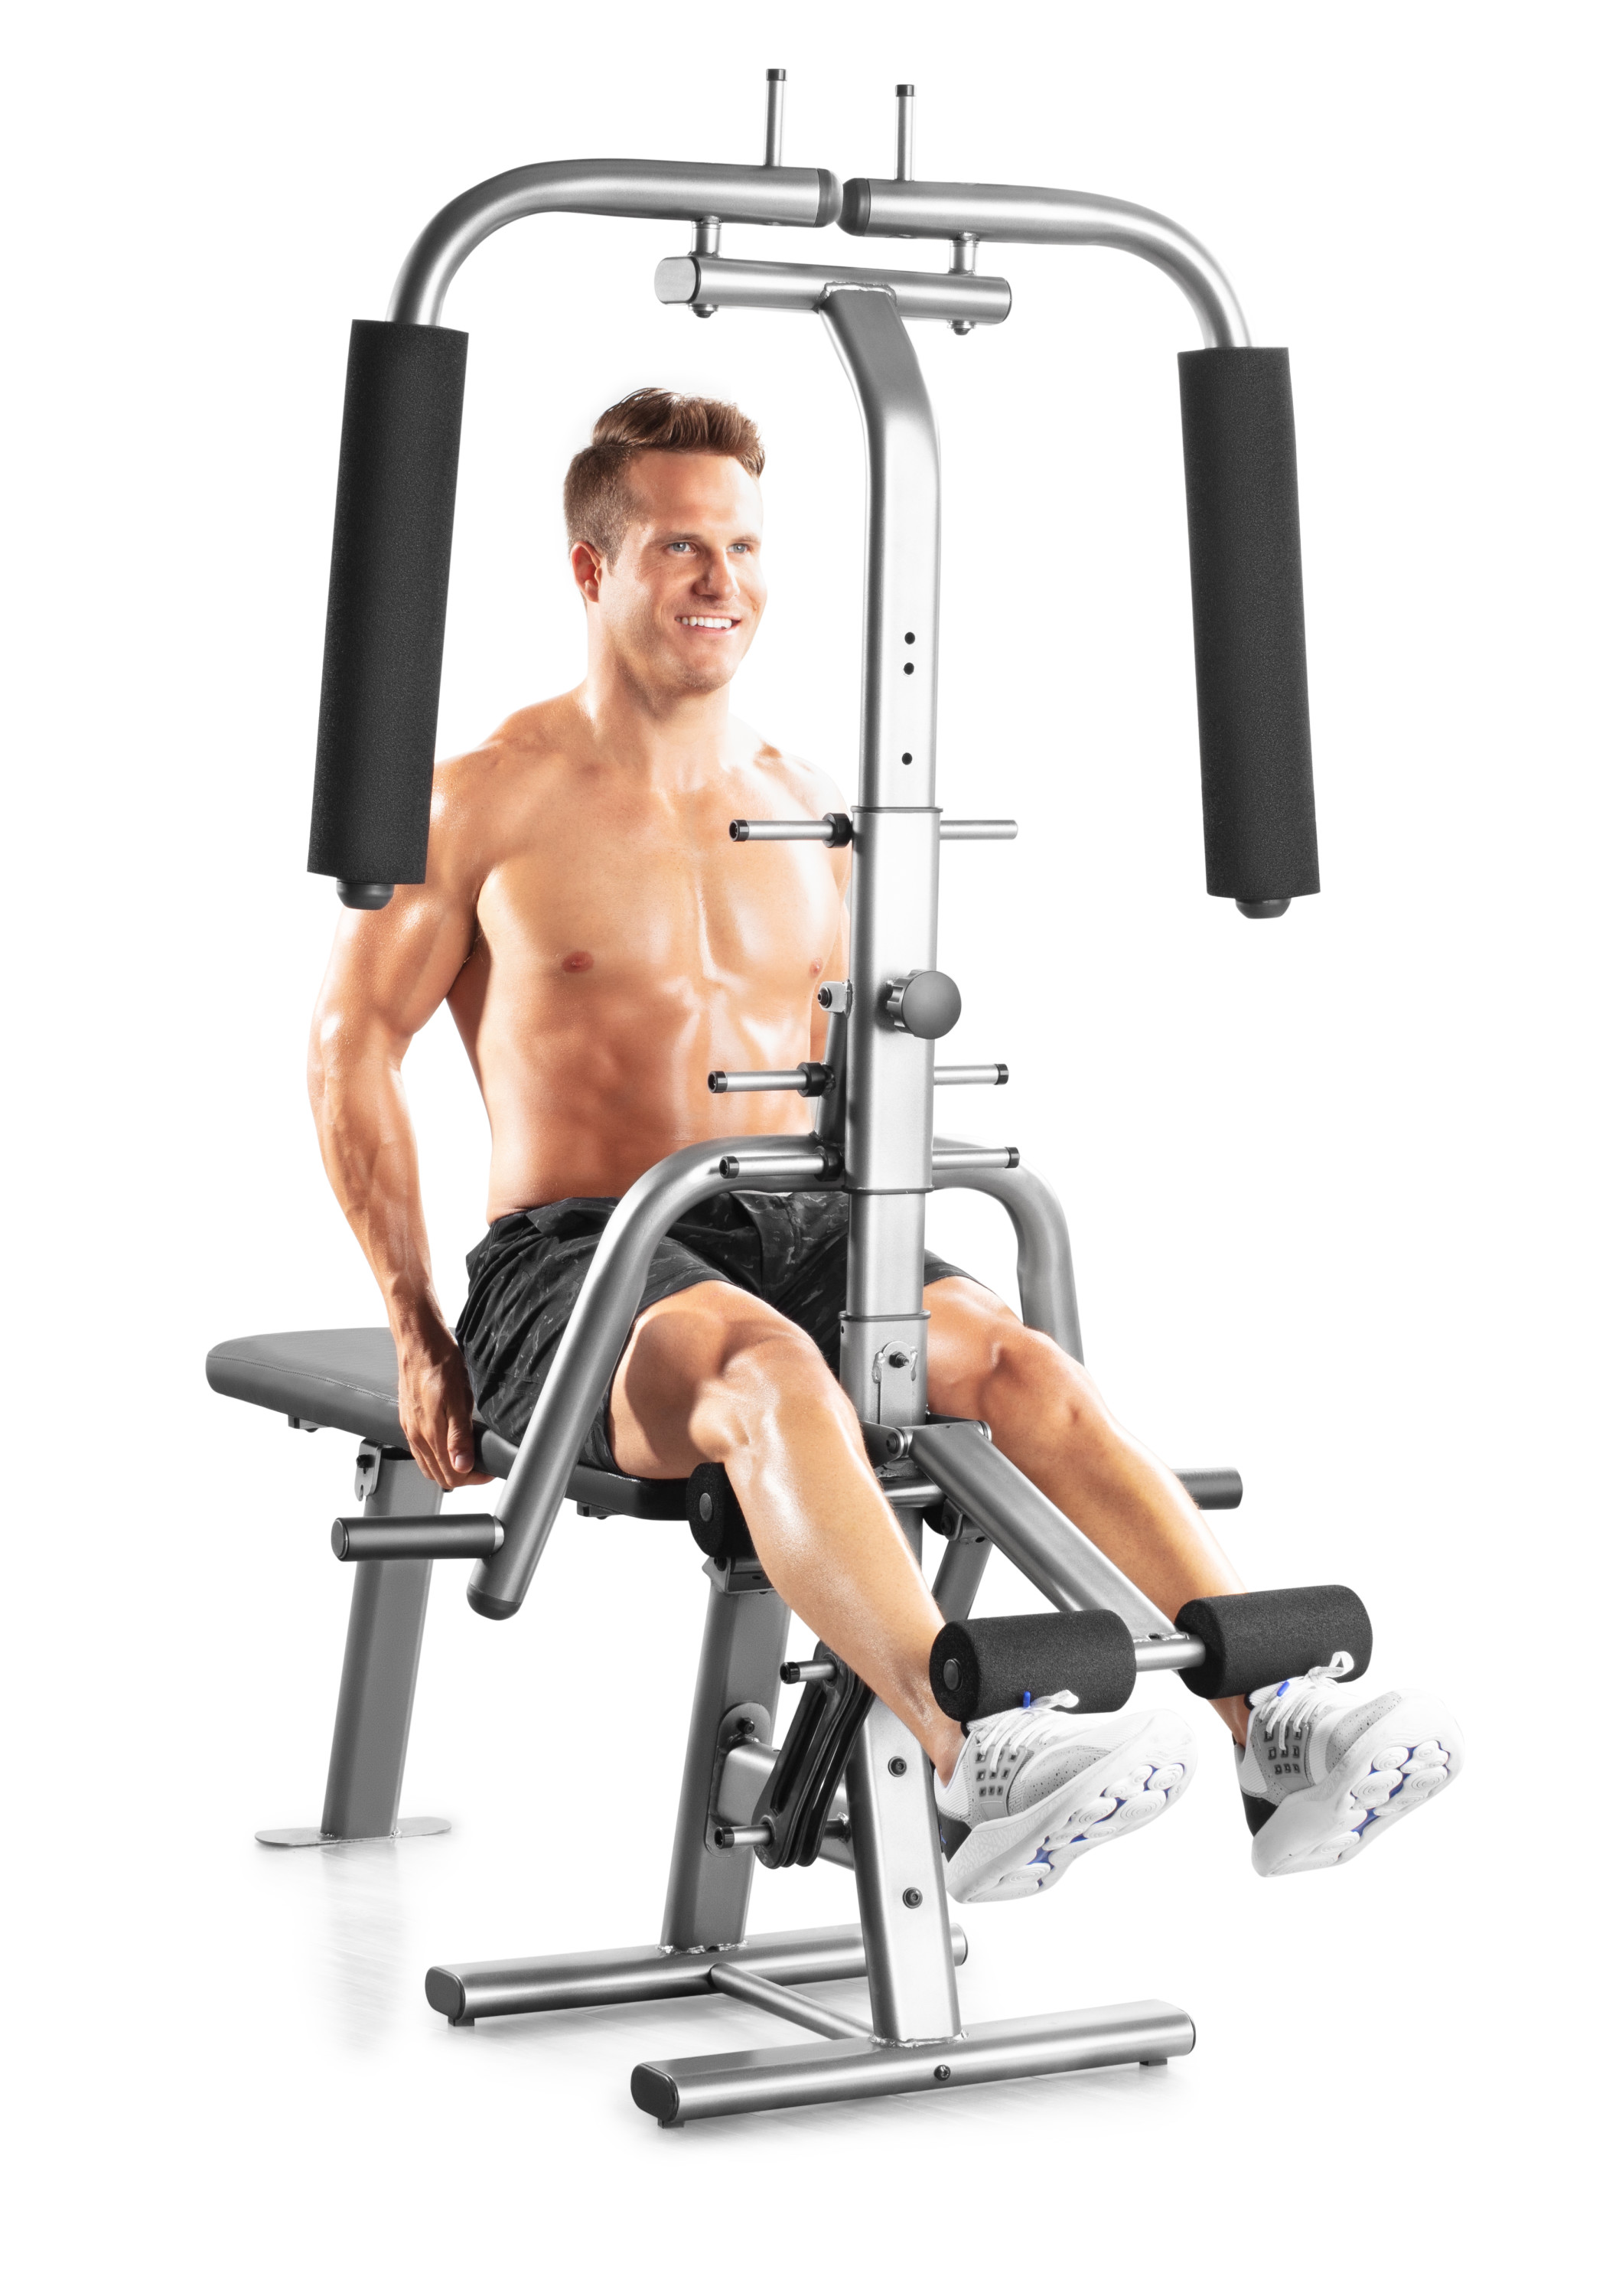 Weider Flex CTS Home Gym System with 14 Resistance Bands and Professionally-Designed Excercise Chart - image 7 of 11